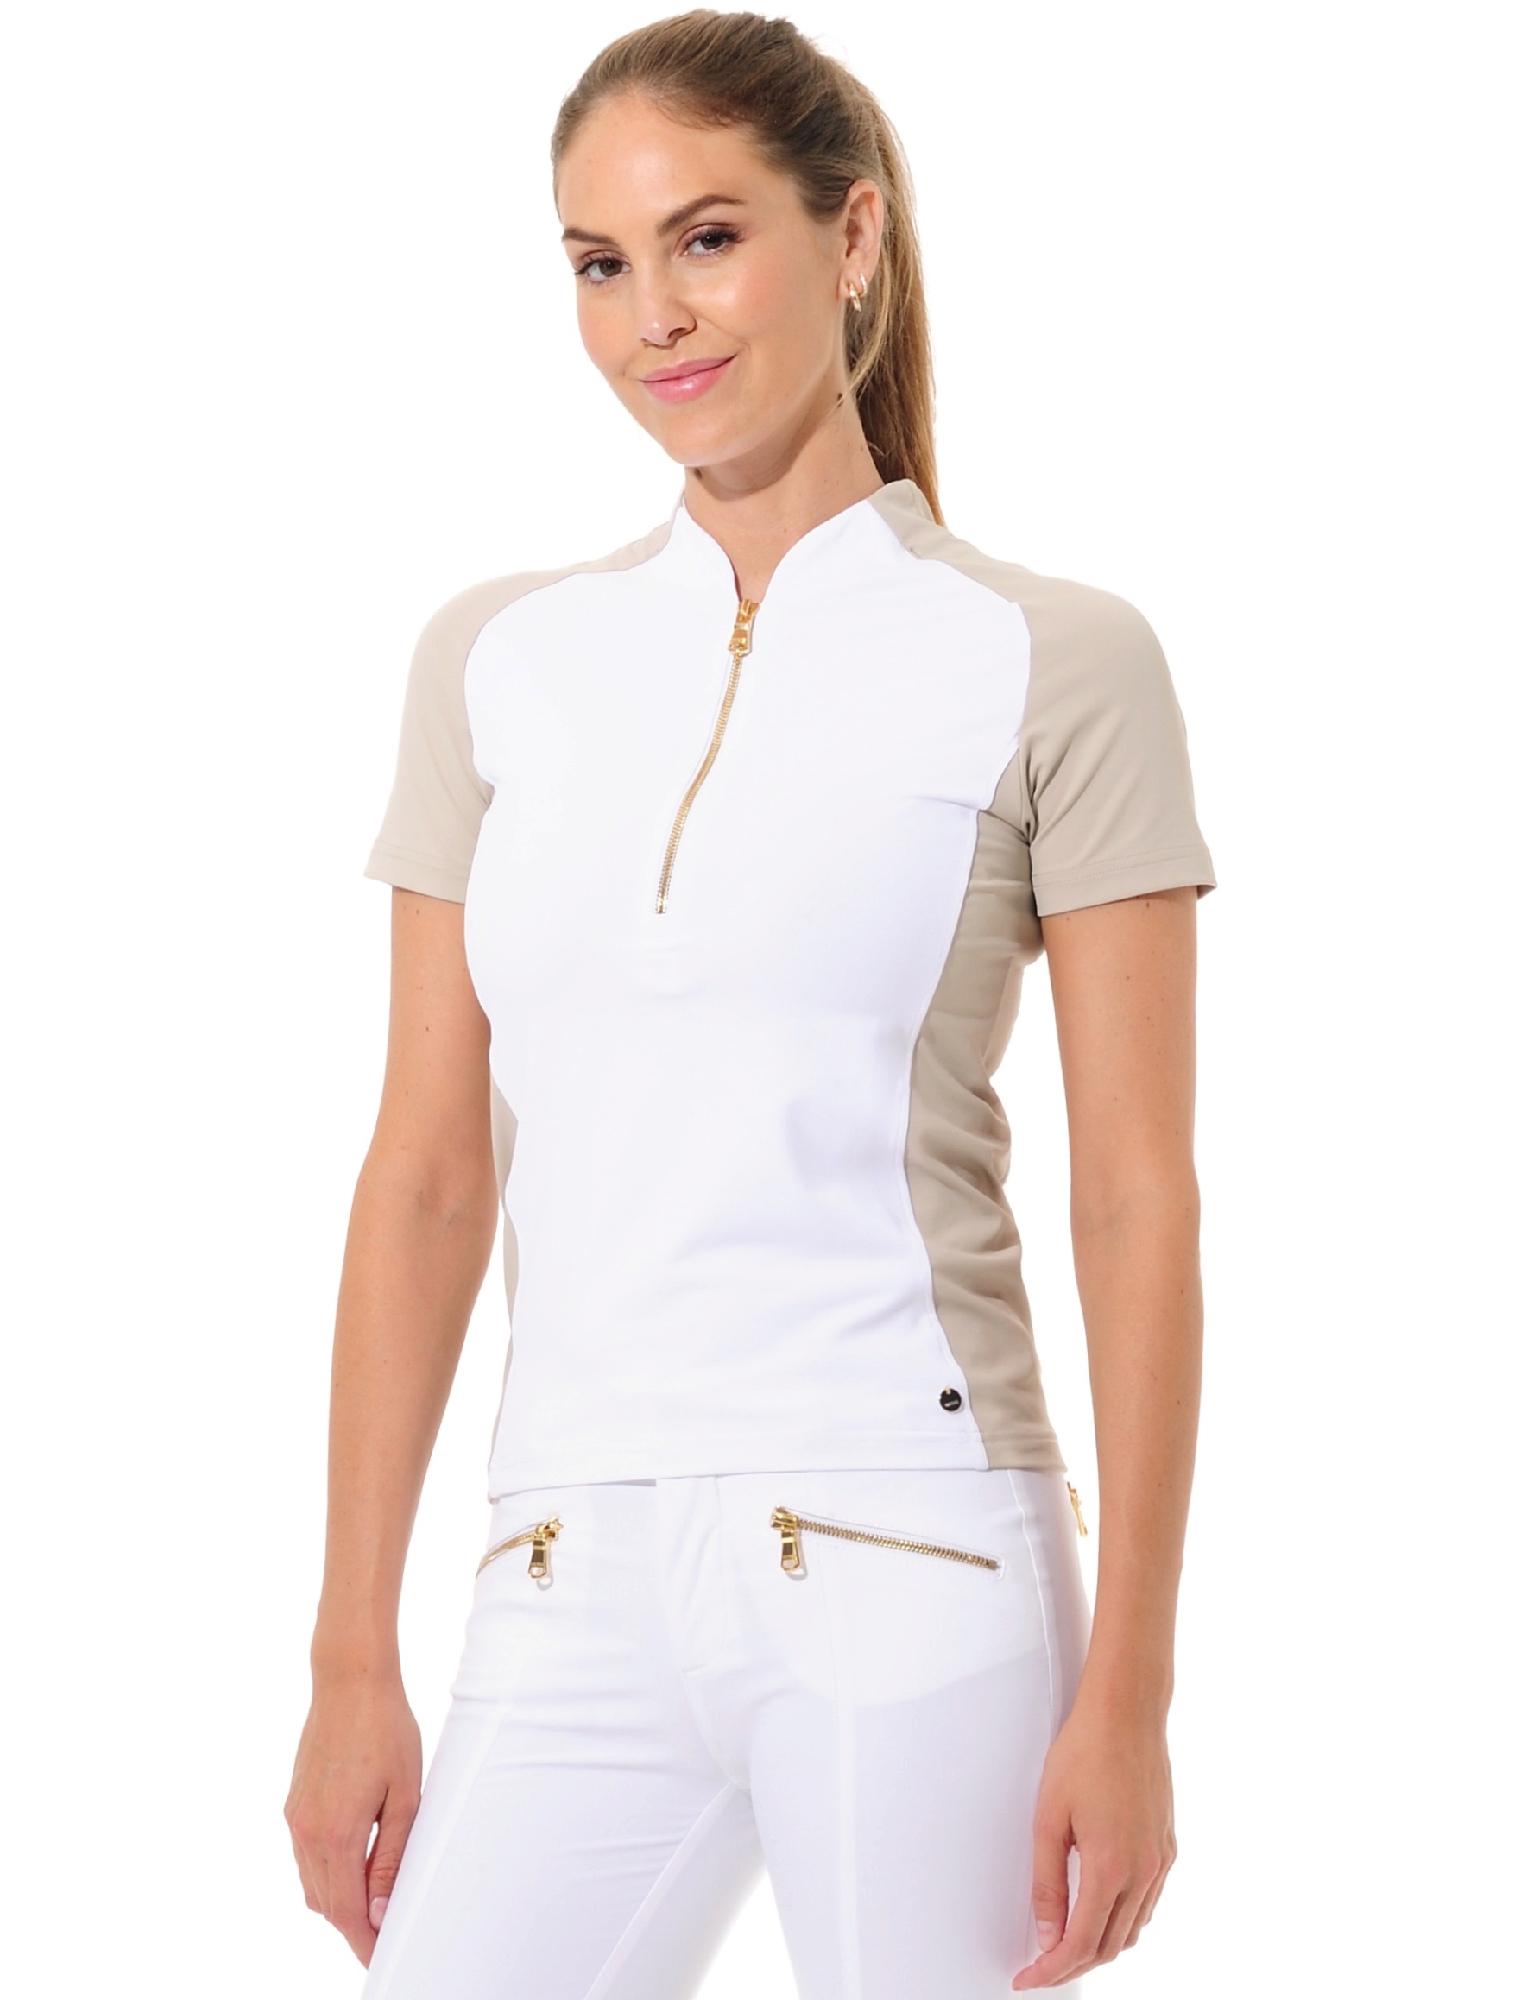 Jersey shiny gold zip polo shirt white/light taupe 